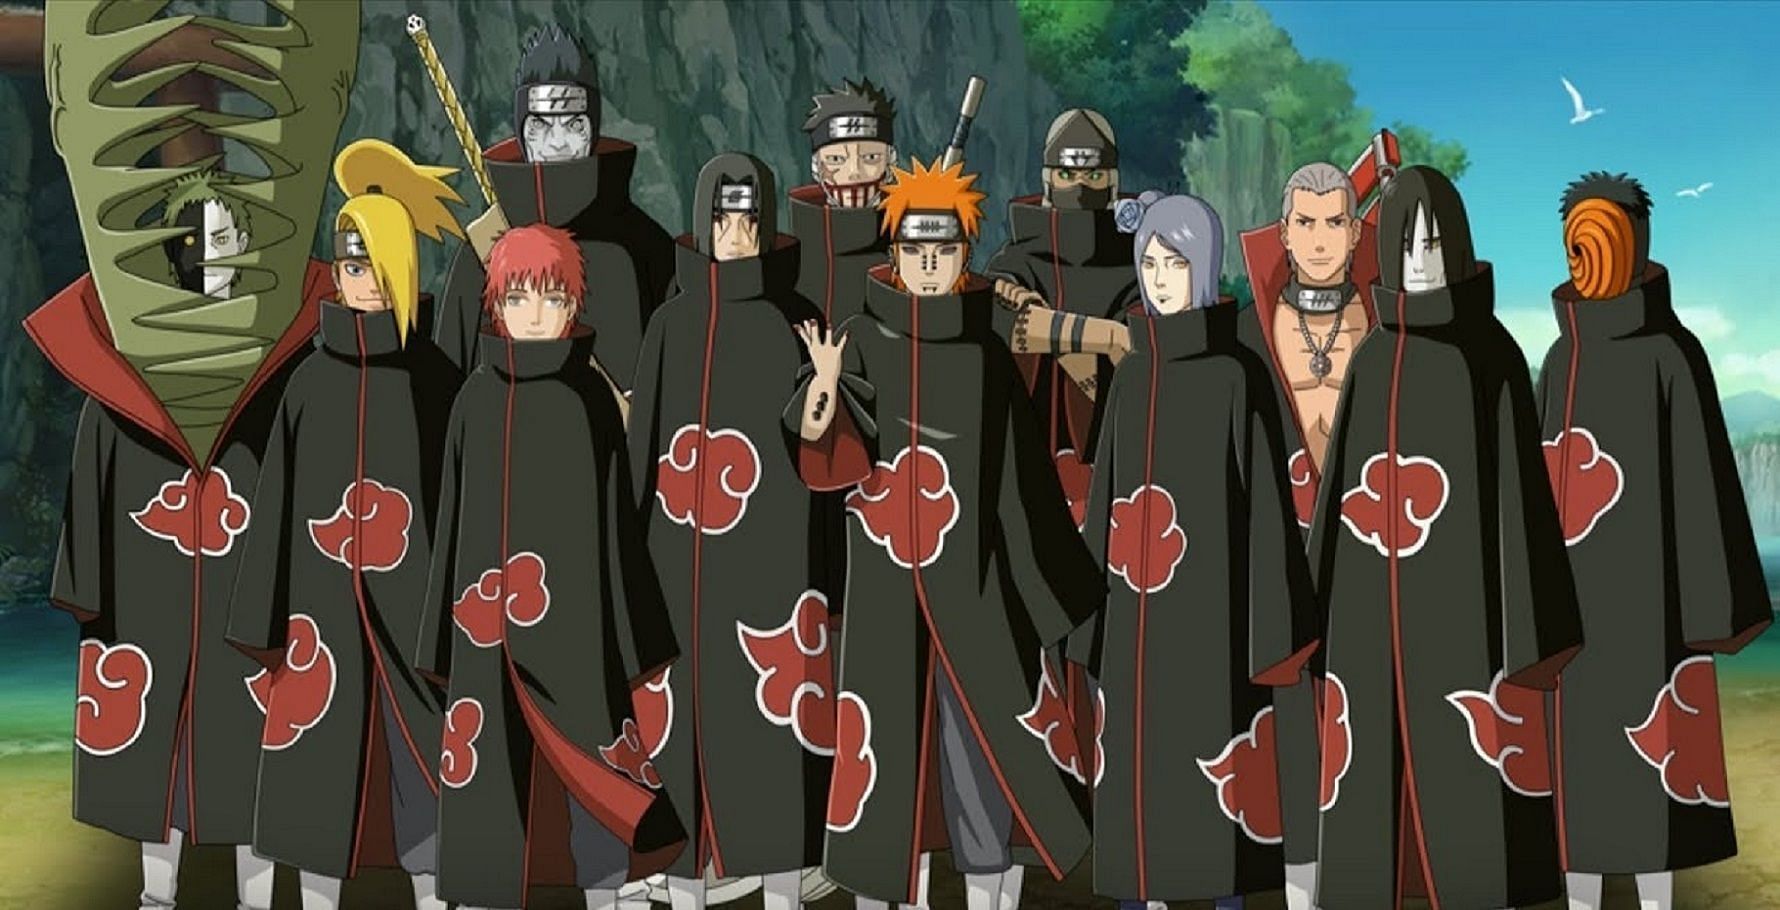 The Akatsuki members as they appear in Naruto (Image via Pierrot)